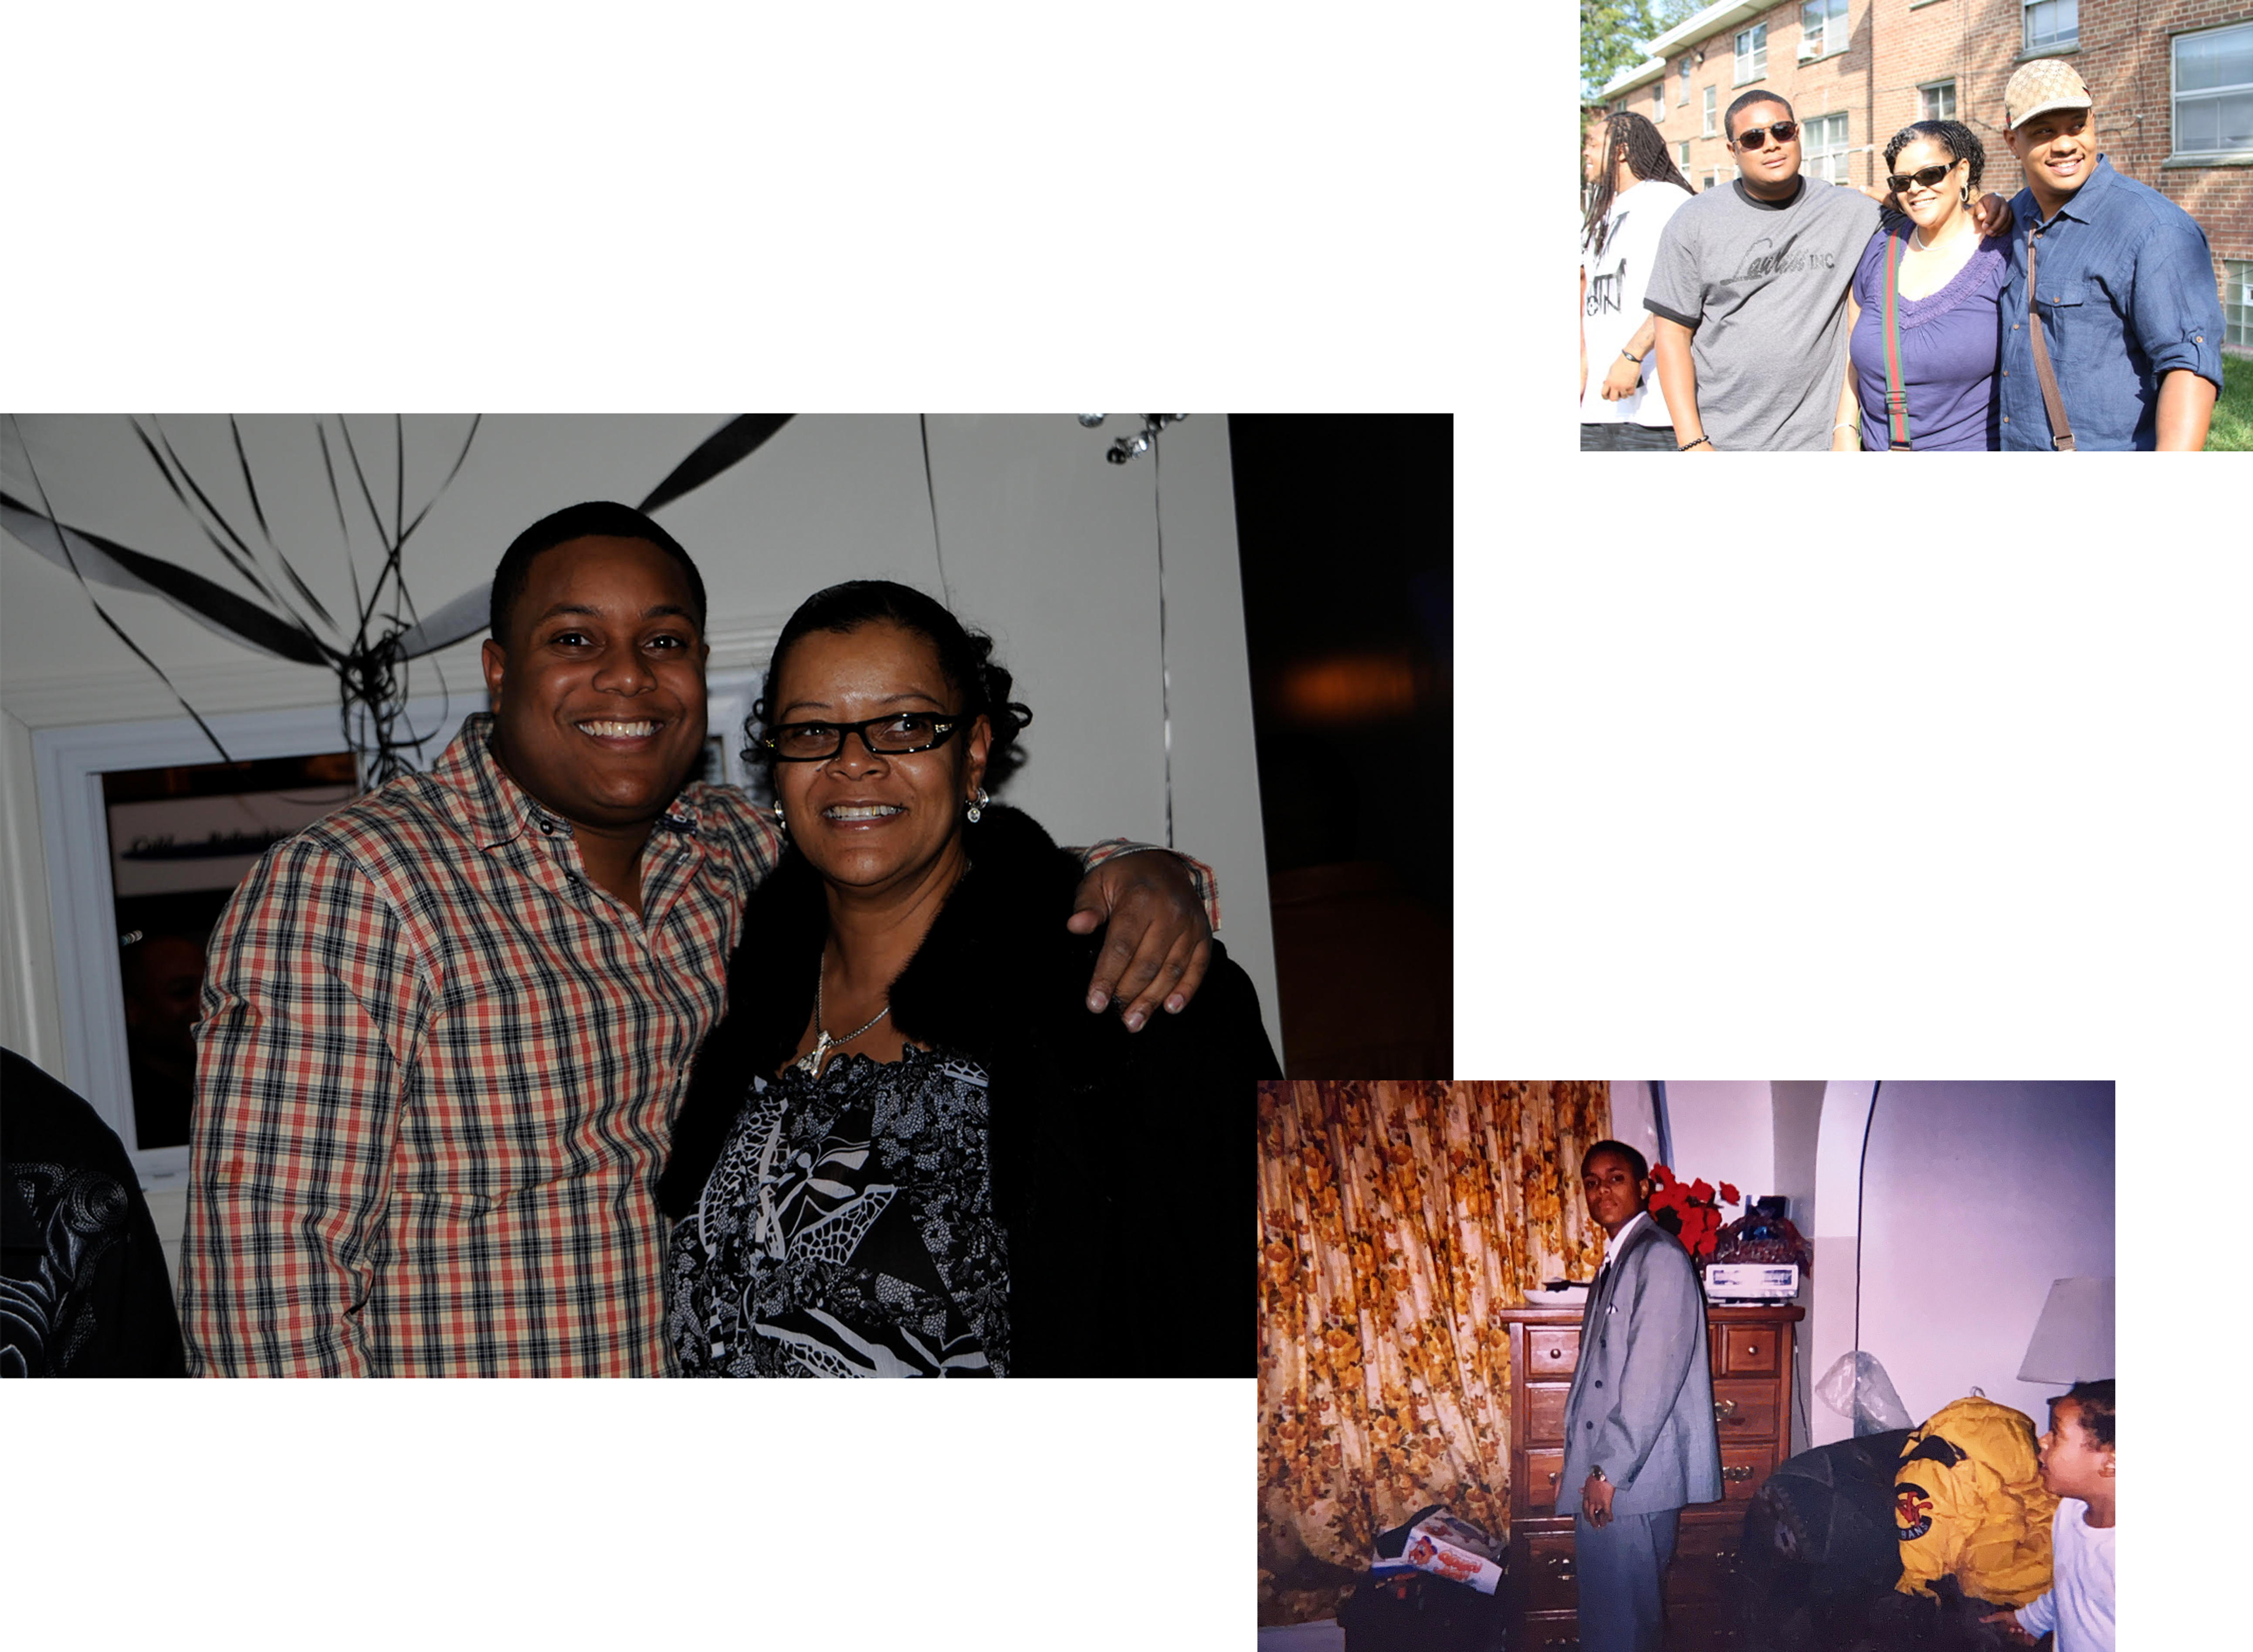 Clockwise from top right: Larro Wilson with his mother and brother, Larro as a young man, and Larro with his mother. 